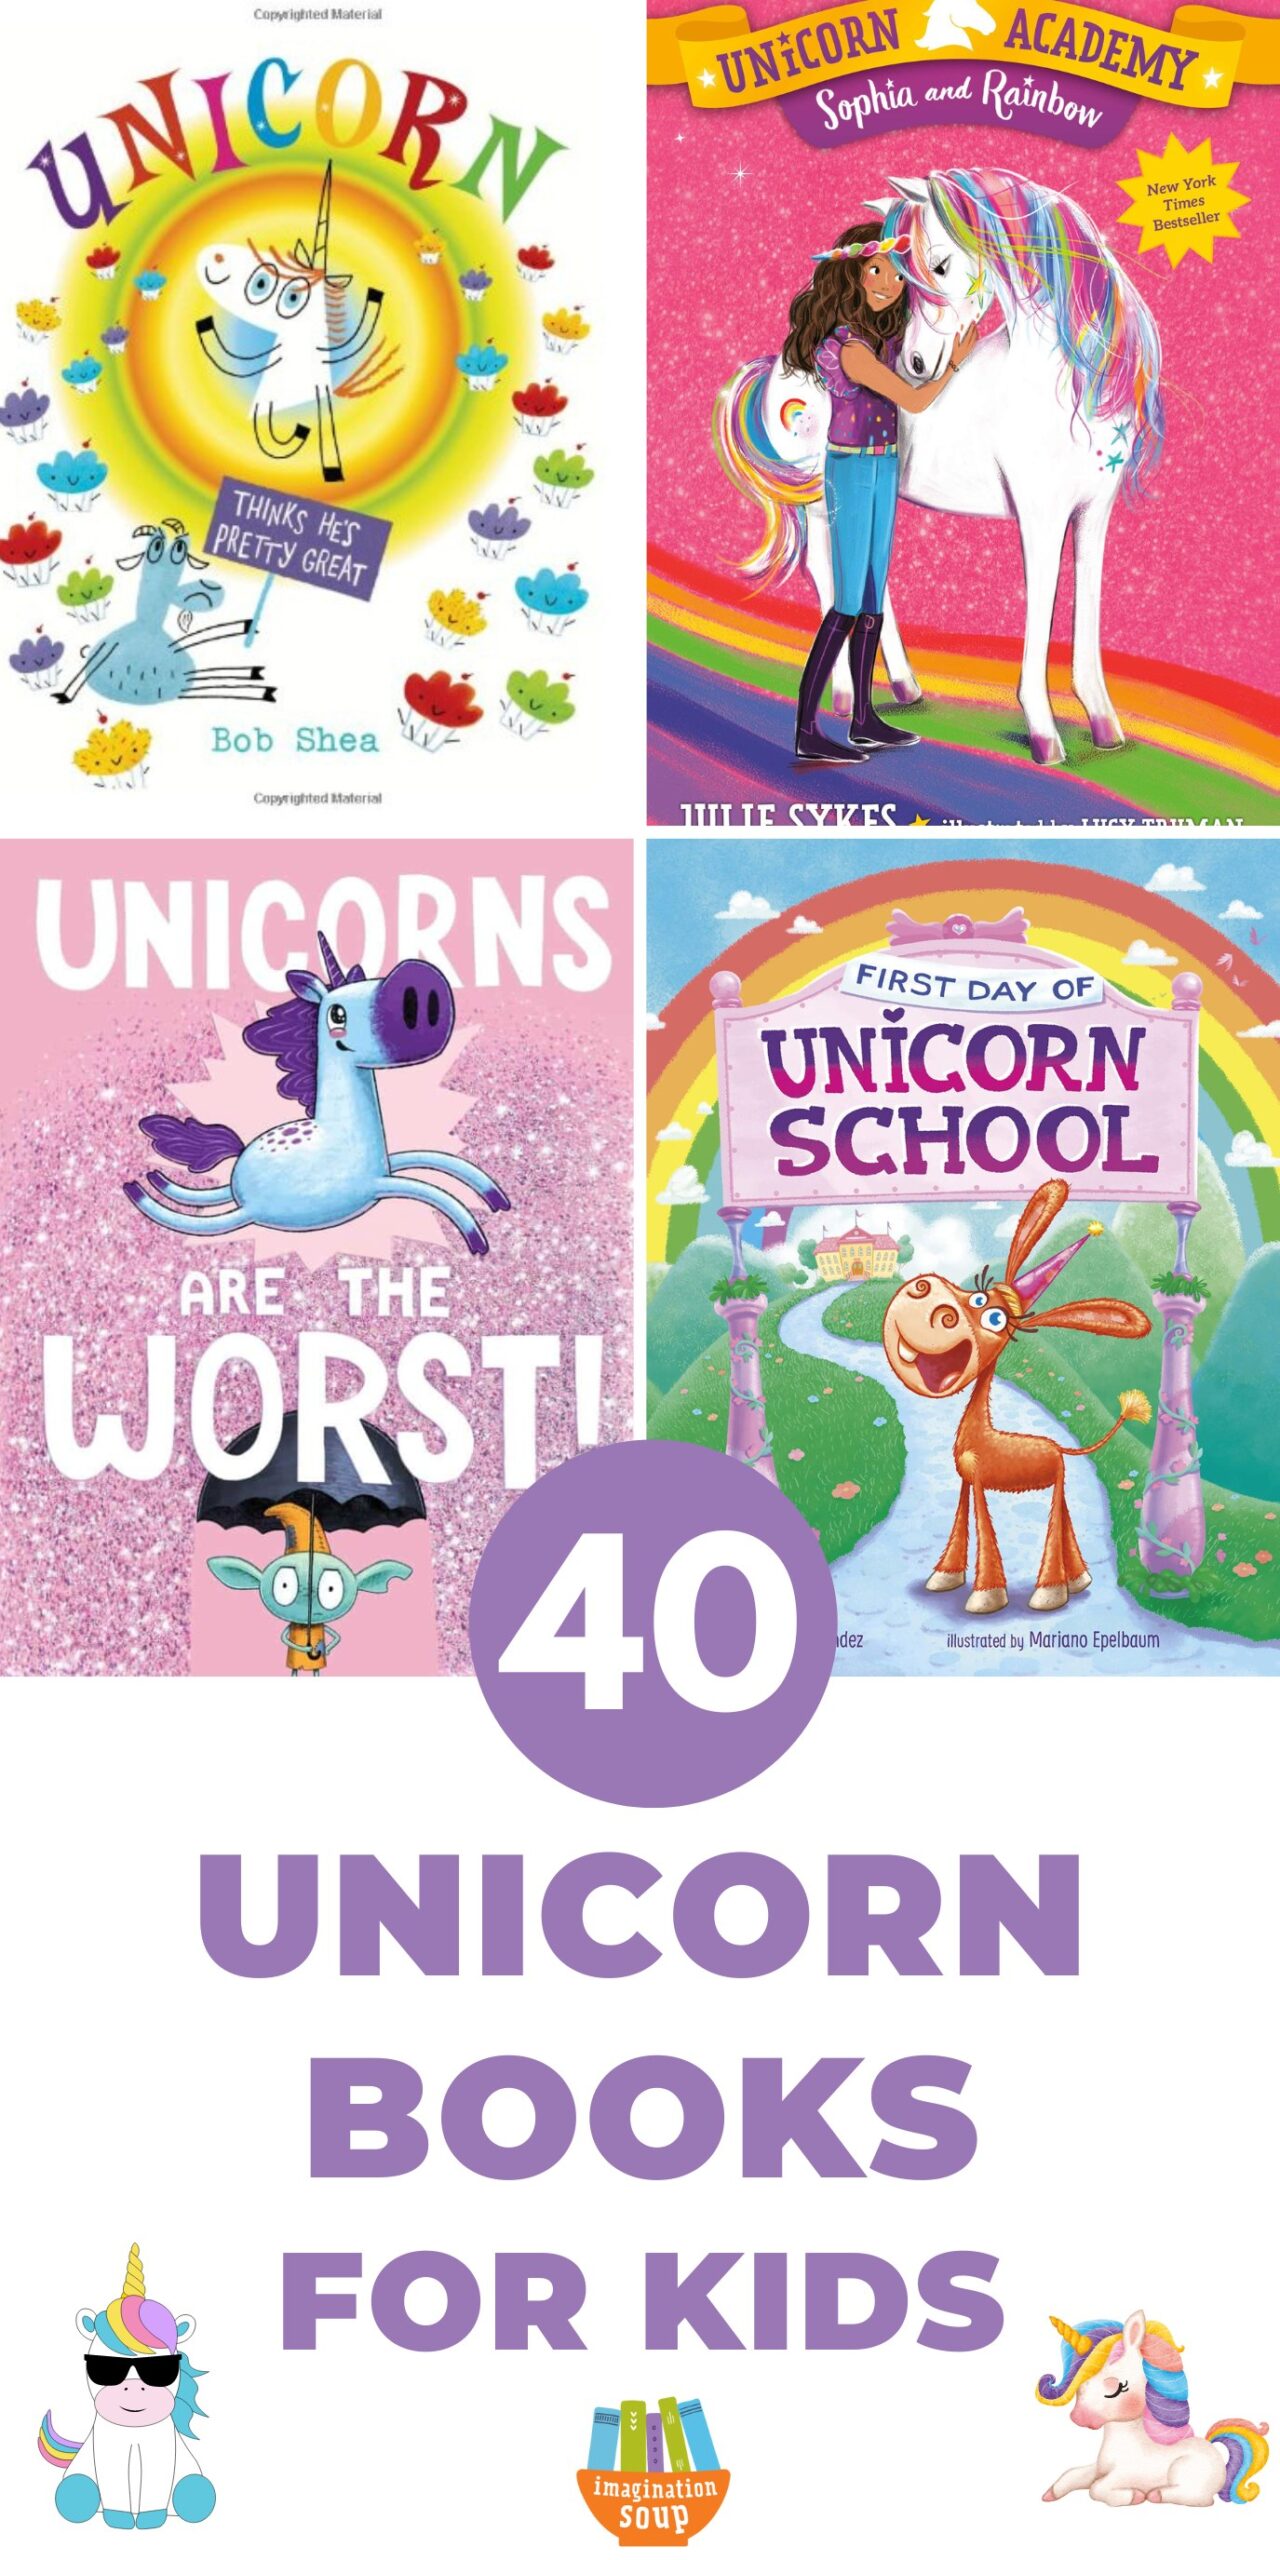 Does your child love unicorns? Of all the magical creatures in the world, unicorns are probably the most beloved by children. Celebrate these fantastical creatures with a memorable unicorn book or three -- picture books for younger readers and chapter books and middle grade books for older readers.